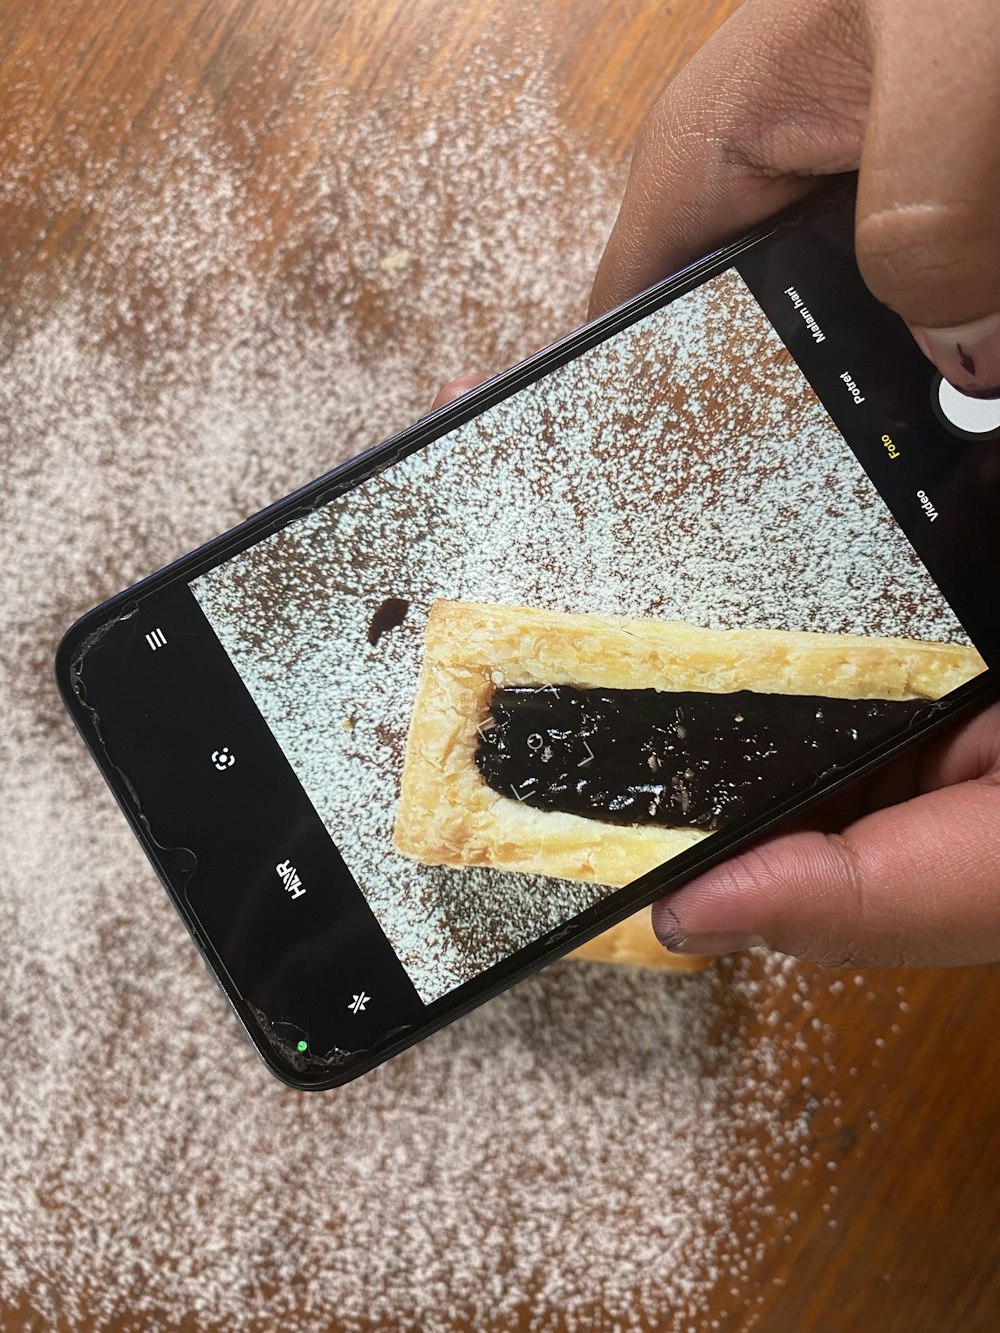 a person taking a picture of some food on a cell phone